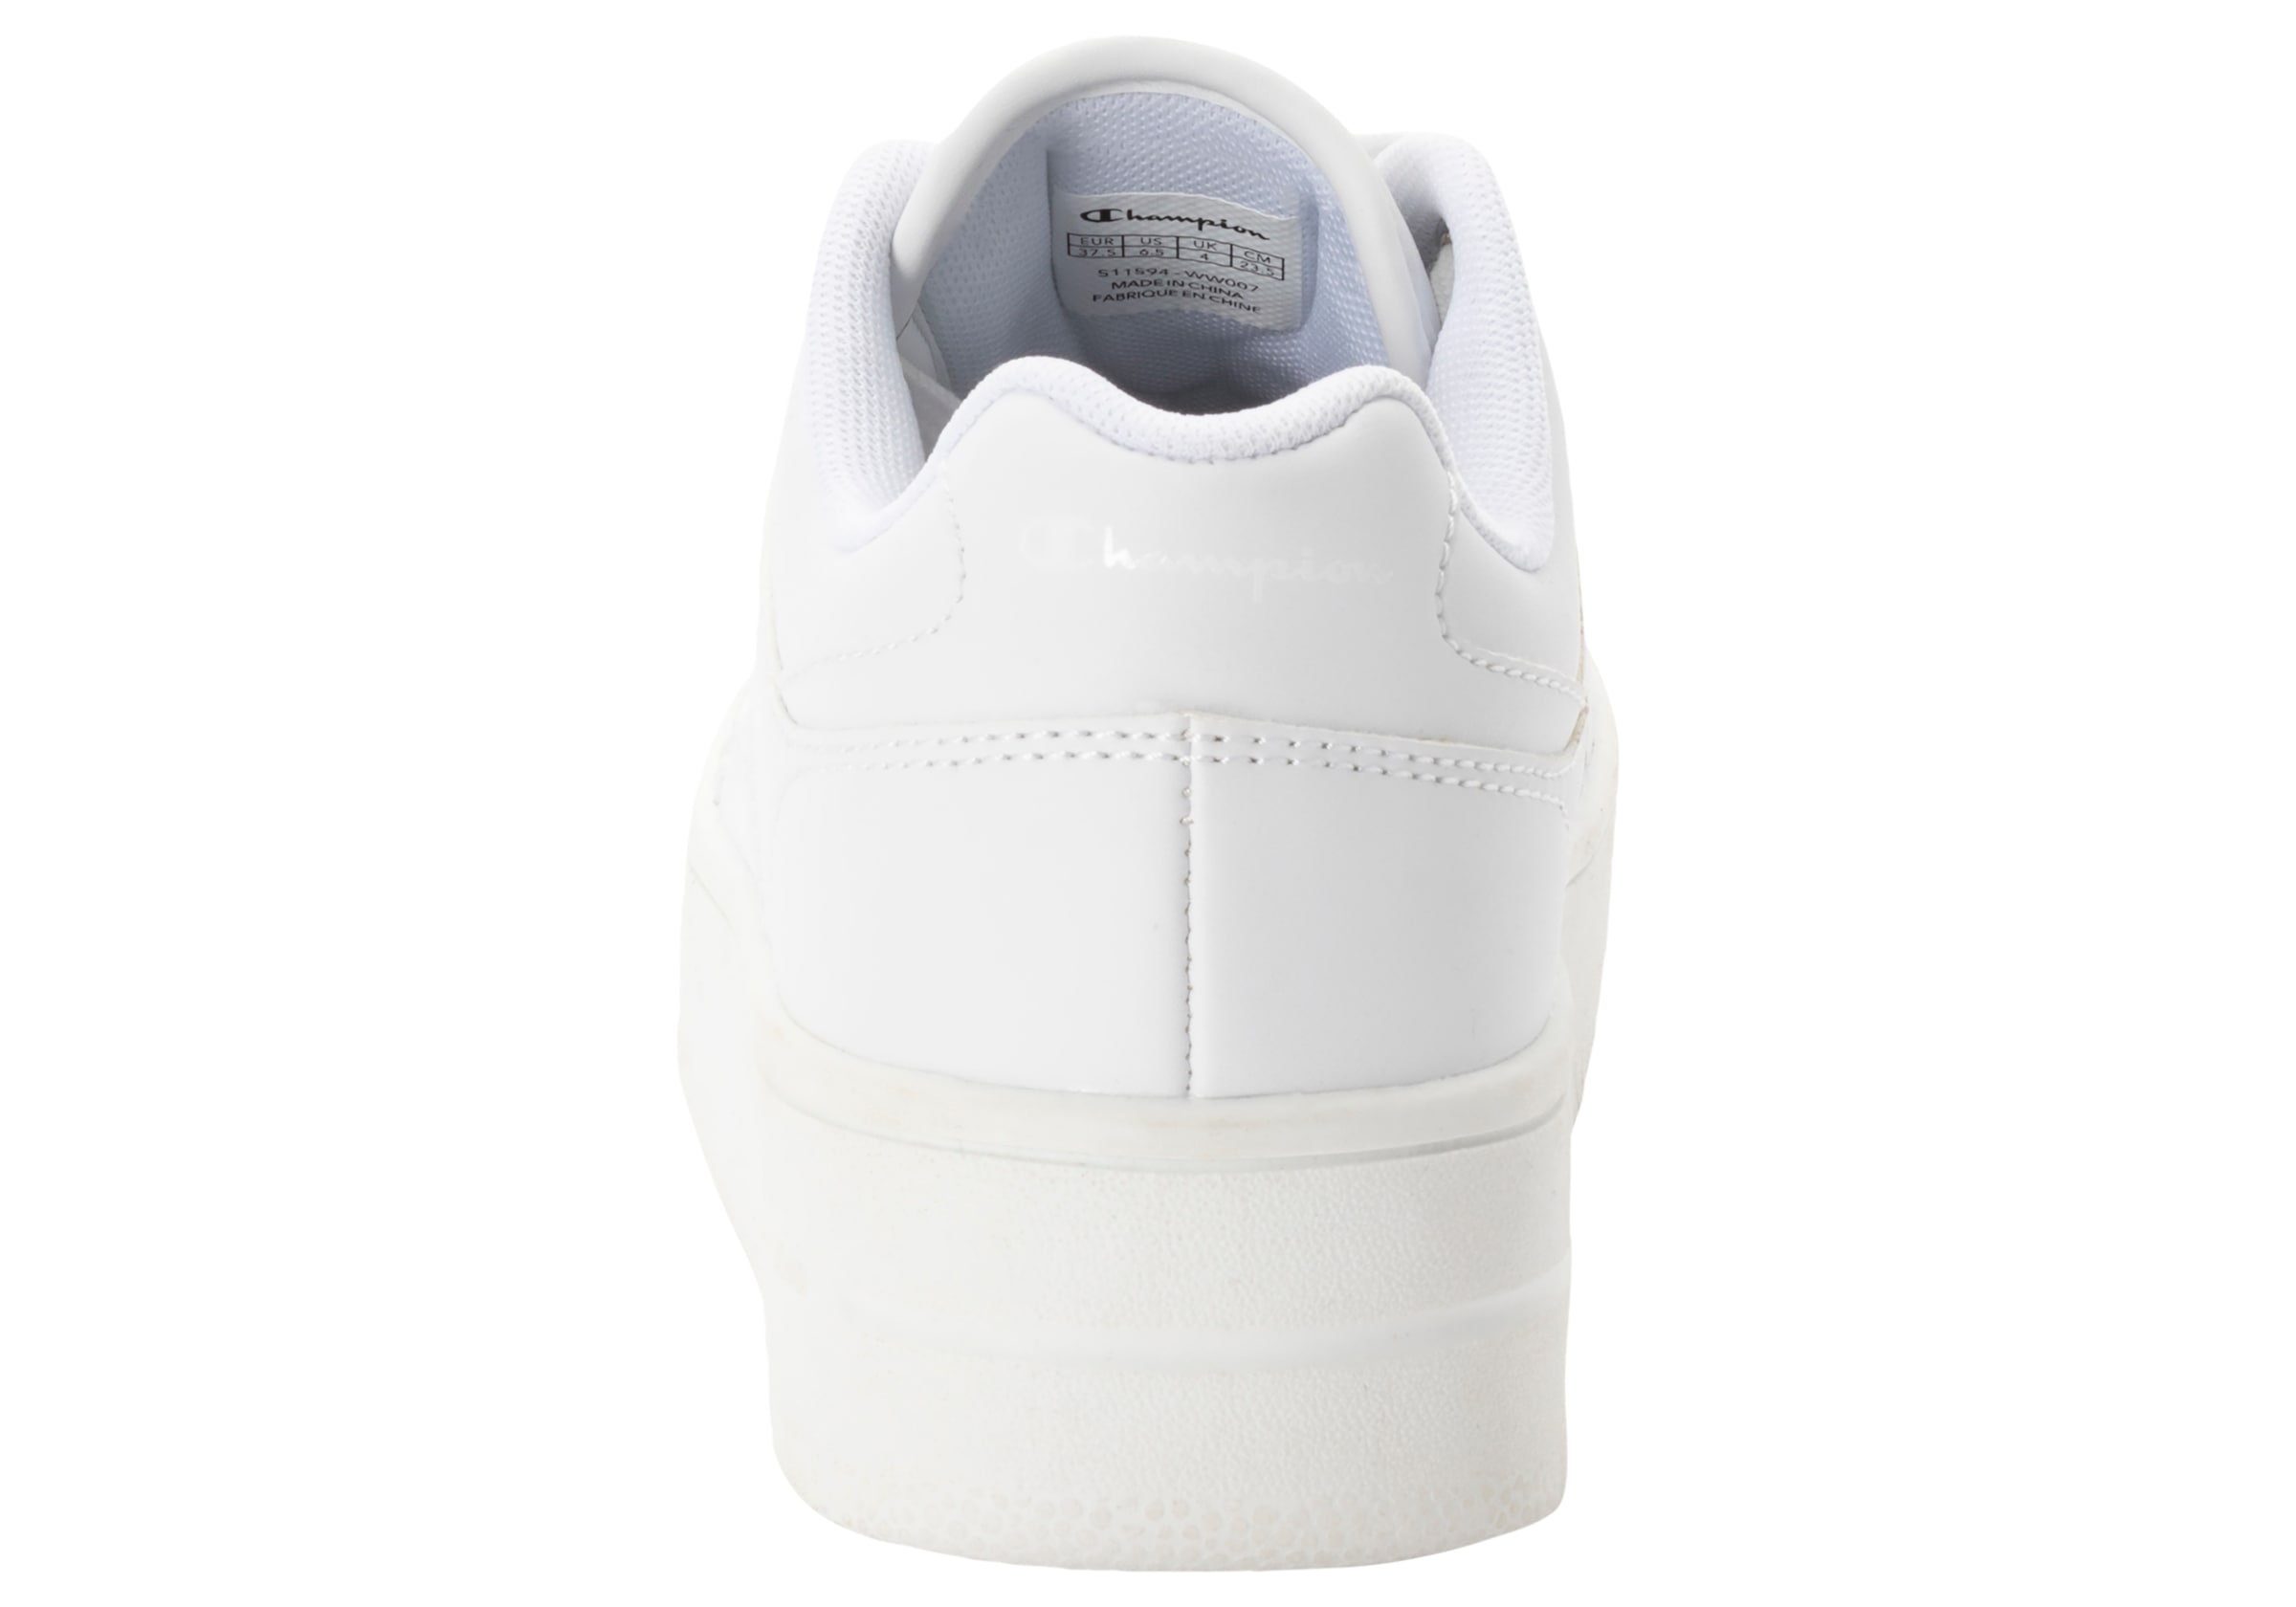 Champion Sneaker »FOUL PLAY PLAT ELEMENT BS«